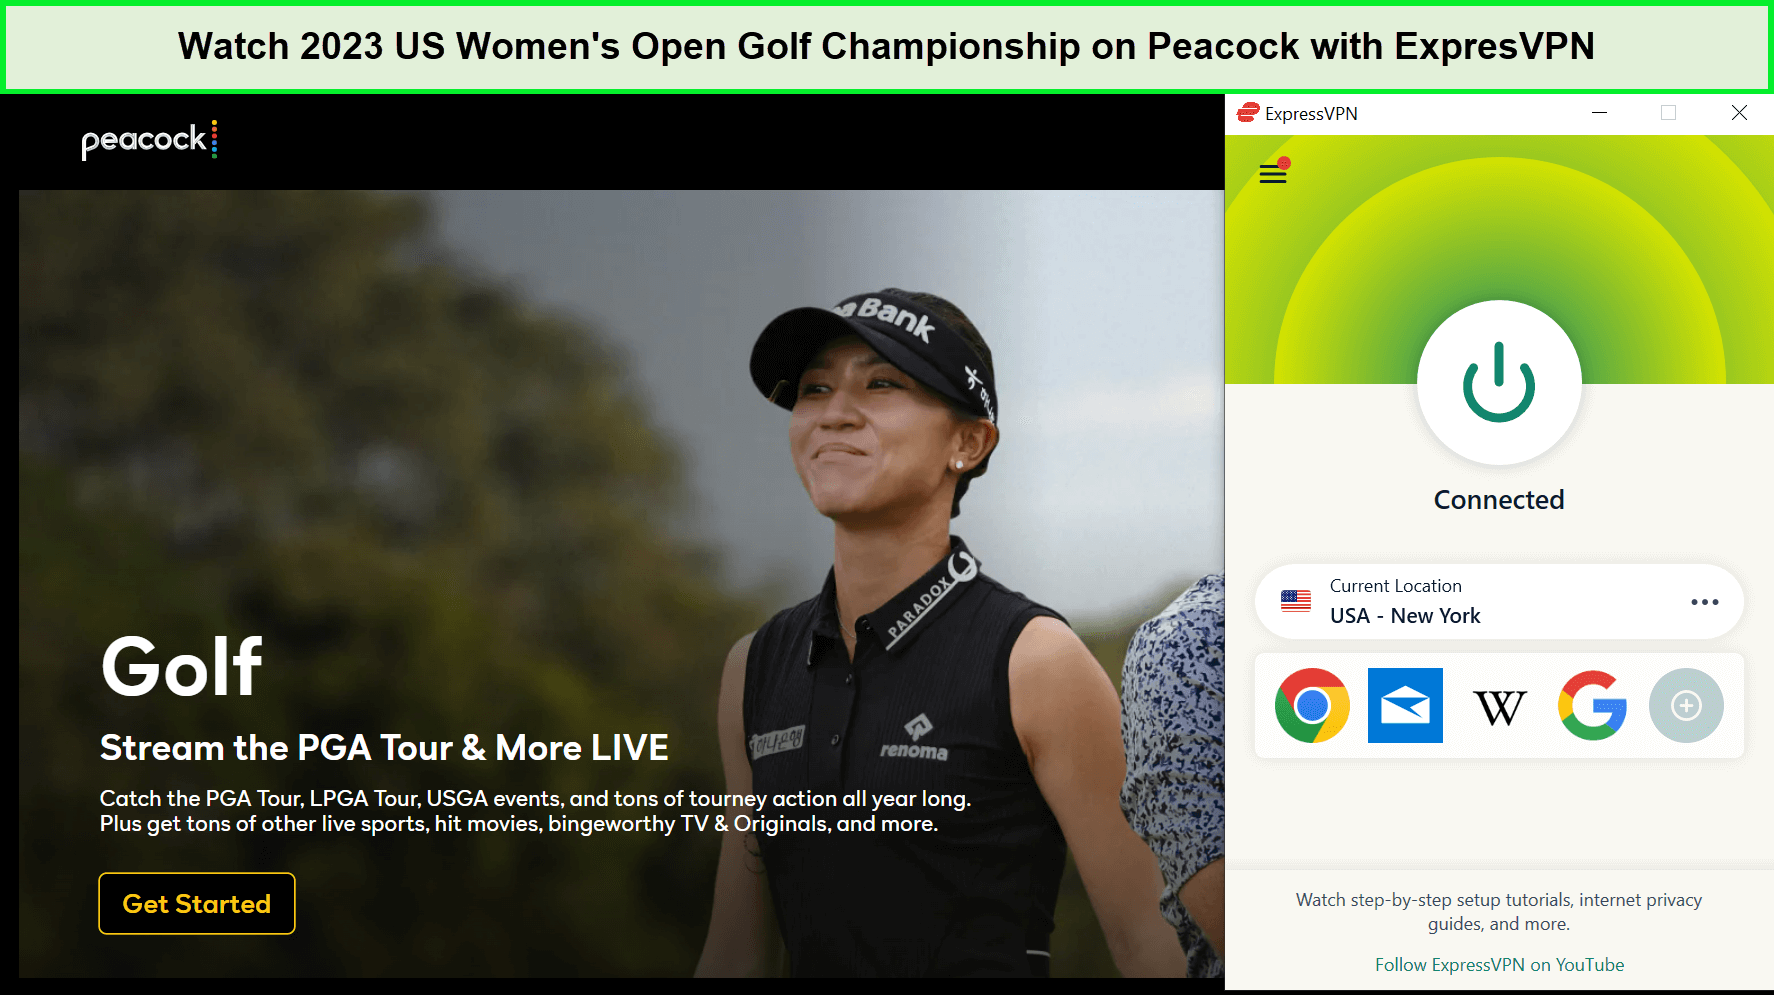 Watch-2023-US-Womens-Open-Golf-Championship-in-India-on-Peacock-with-ExpresVPN